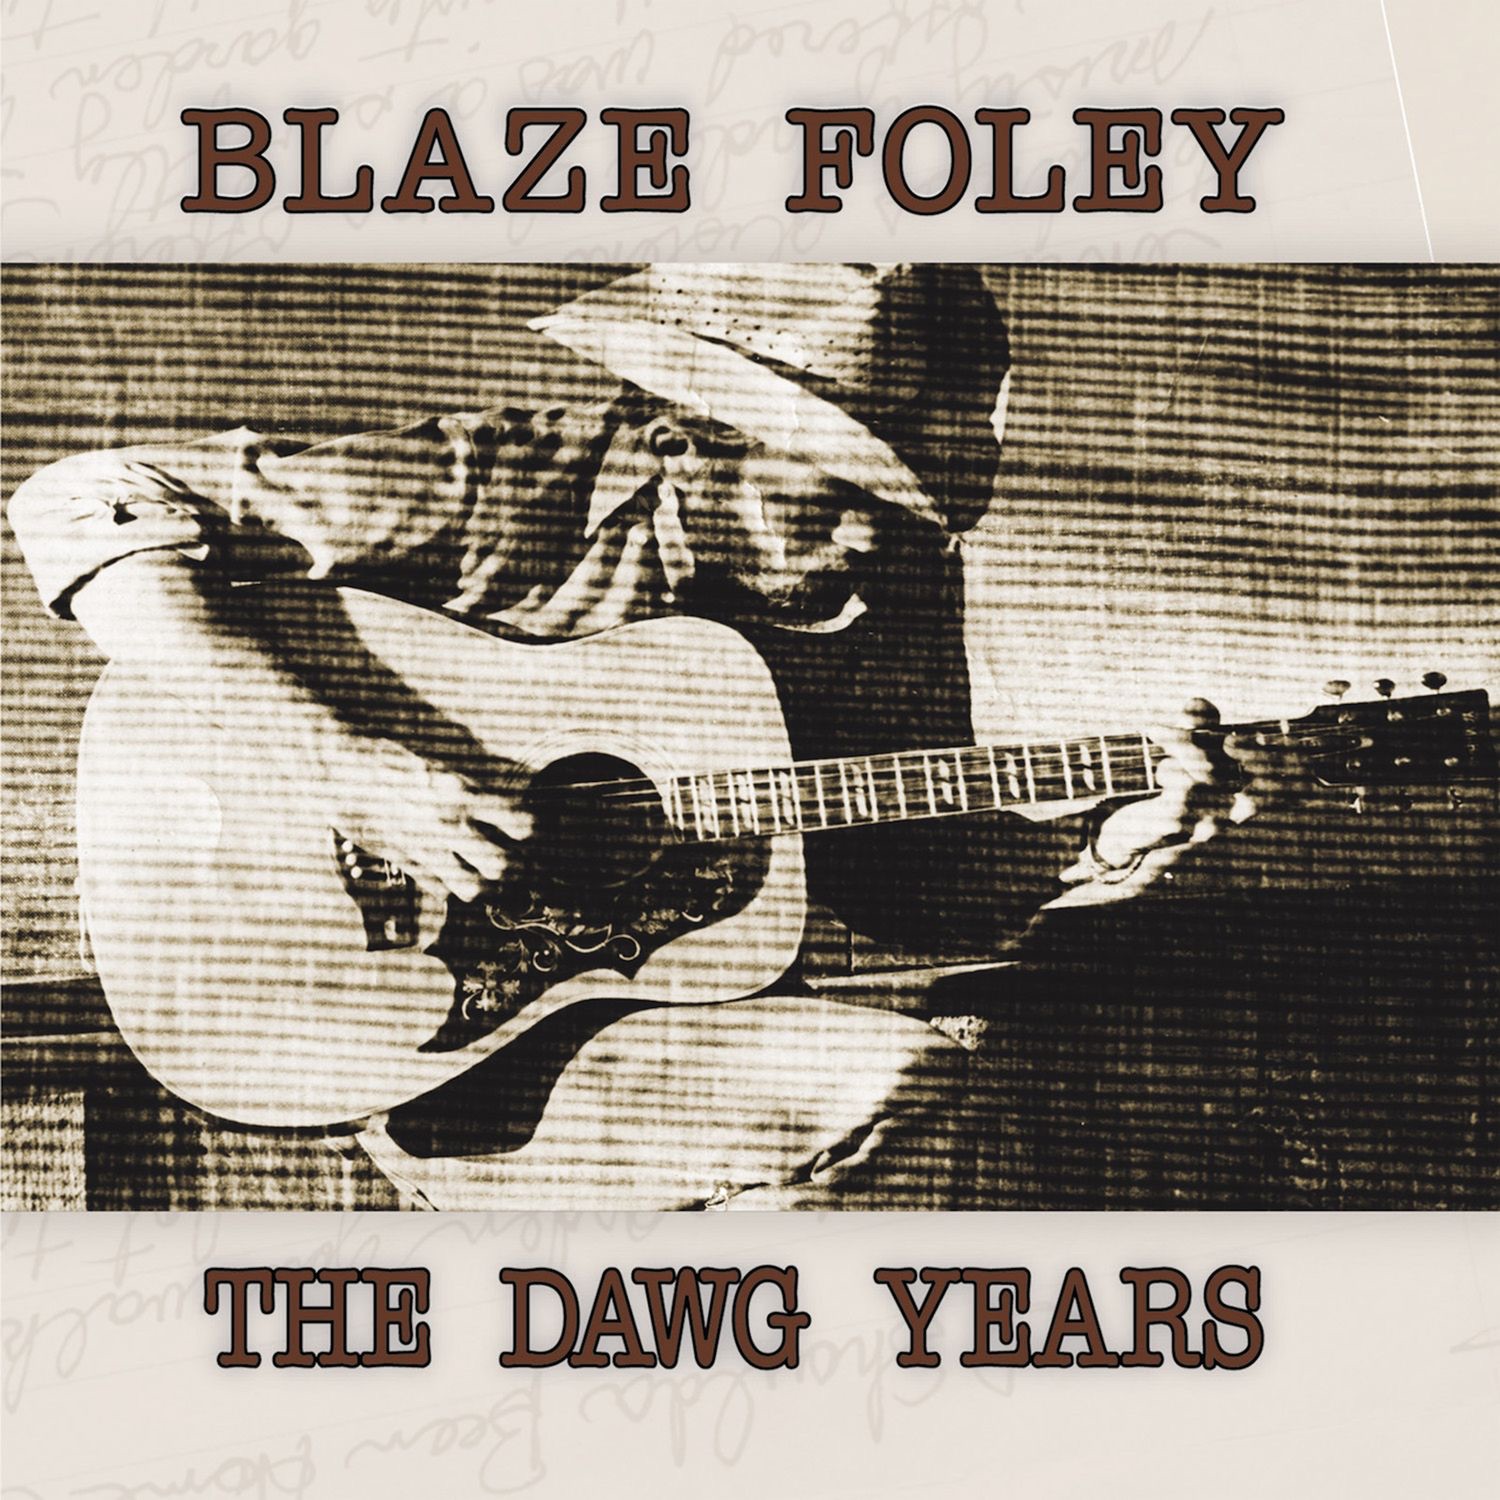 Art for The Moonlight Song by Blaze Foley